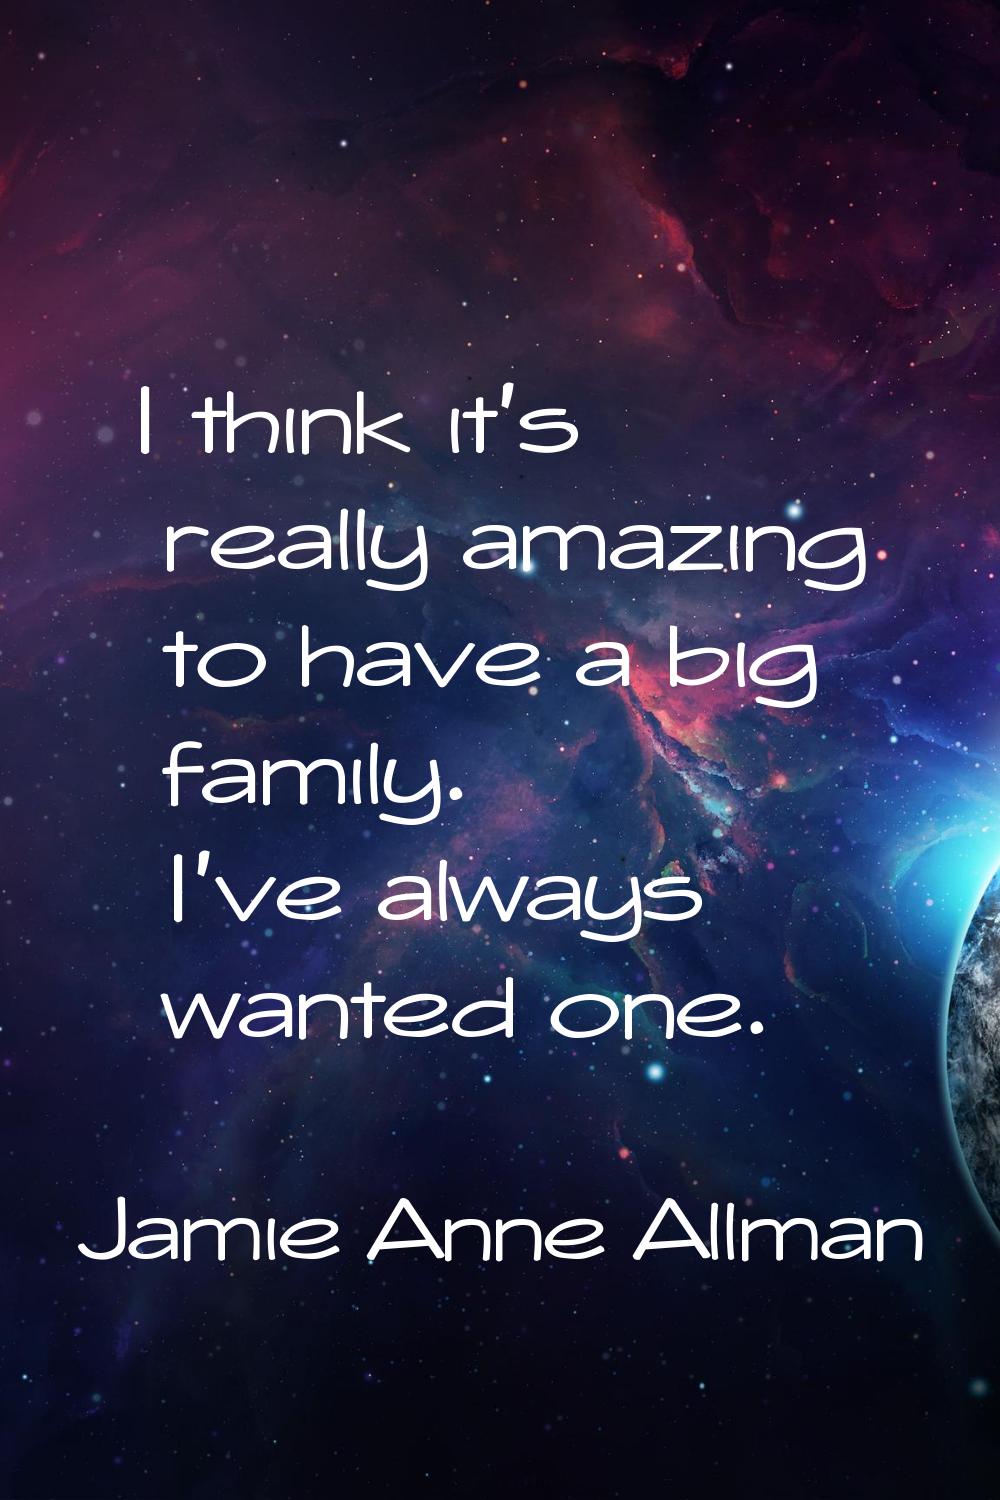 I think it's really amazing to have a big family. I've always wanted one.